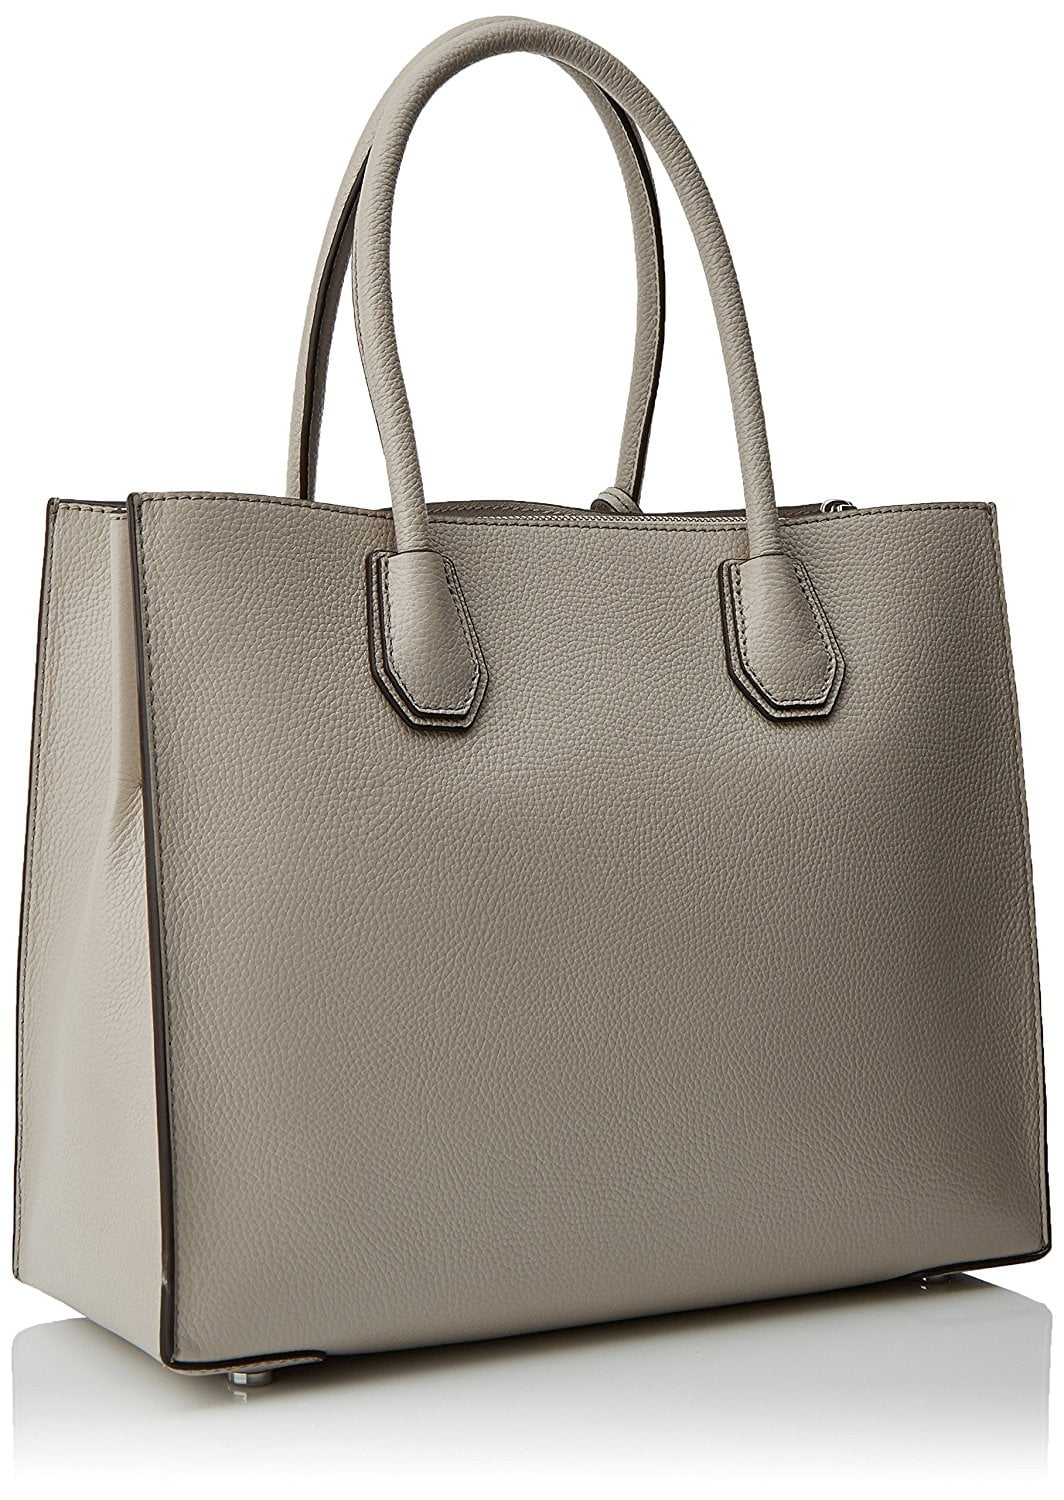 Michael Kors Mercer Large Bonded Leather Tote - Cement 30F6SM9T3L